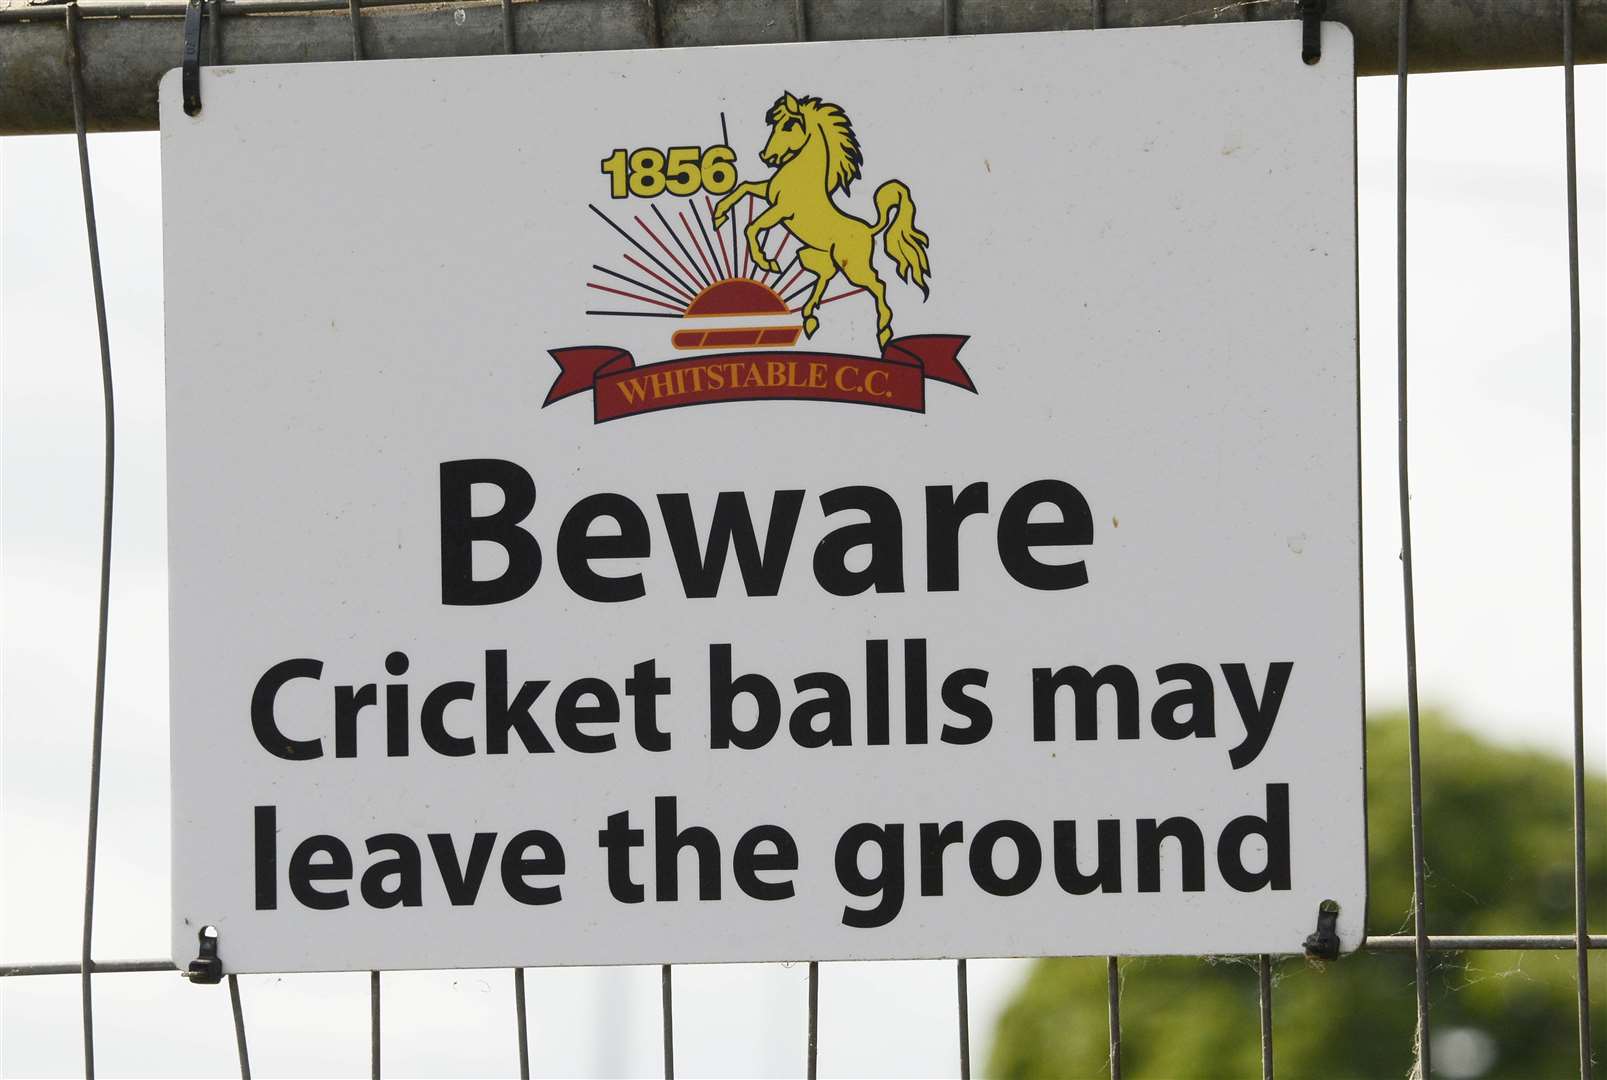 A warning on a fence at The Belmont ground in Whitstable